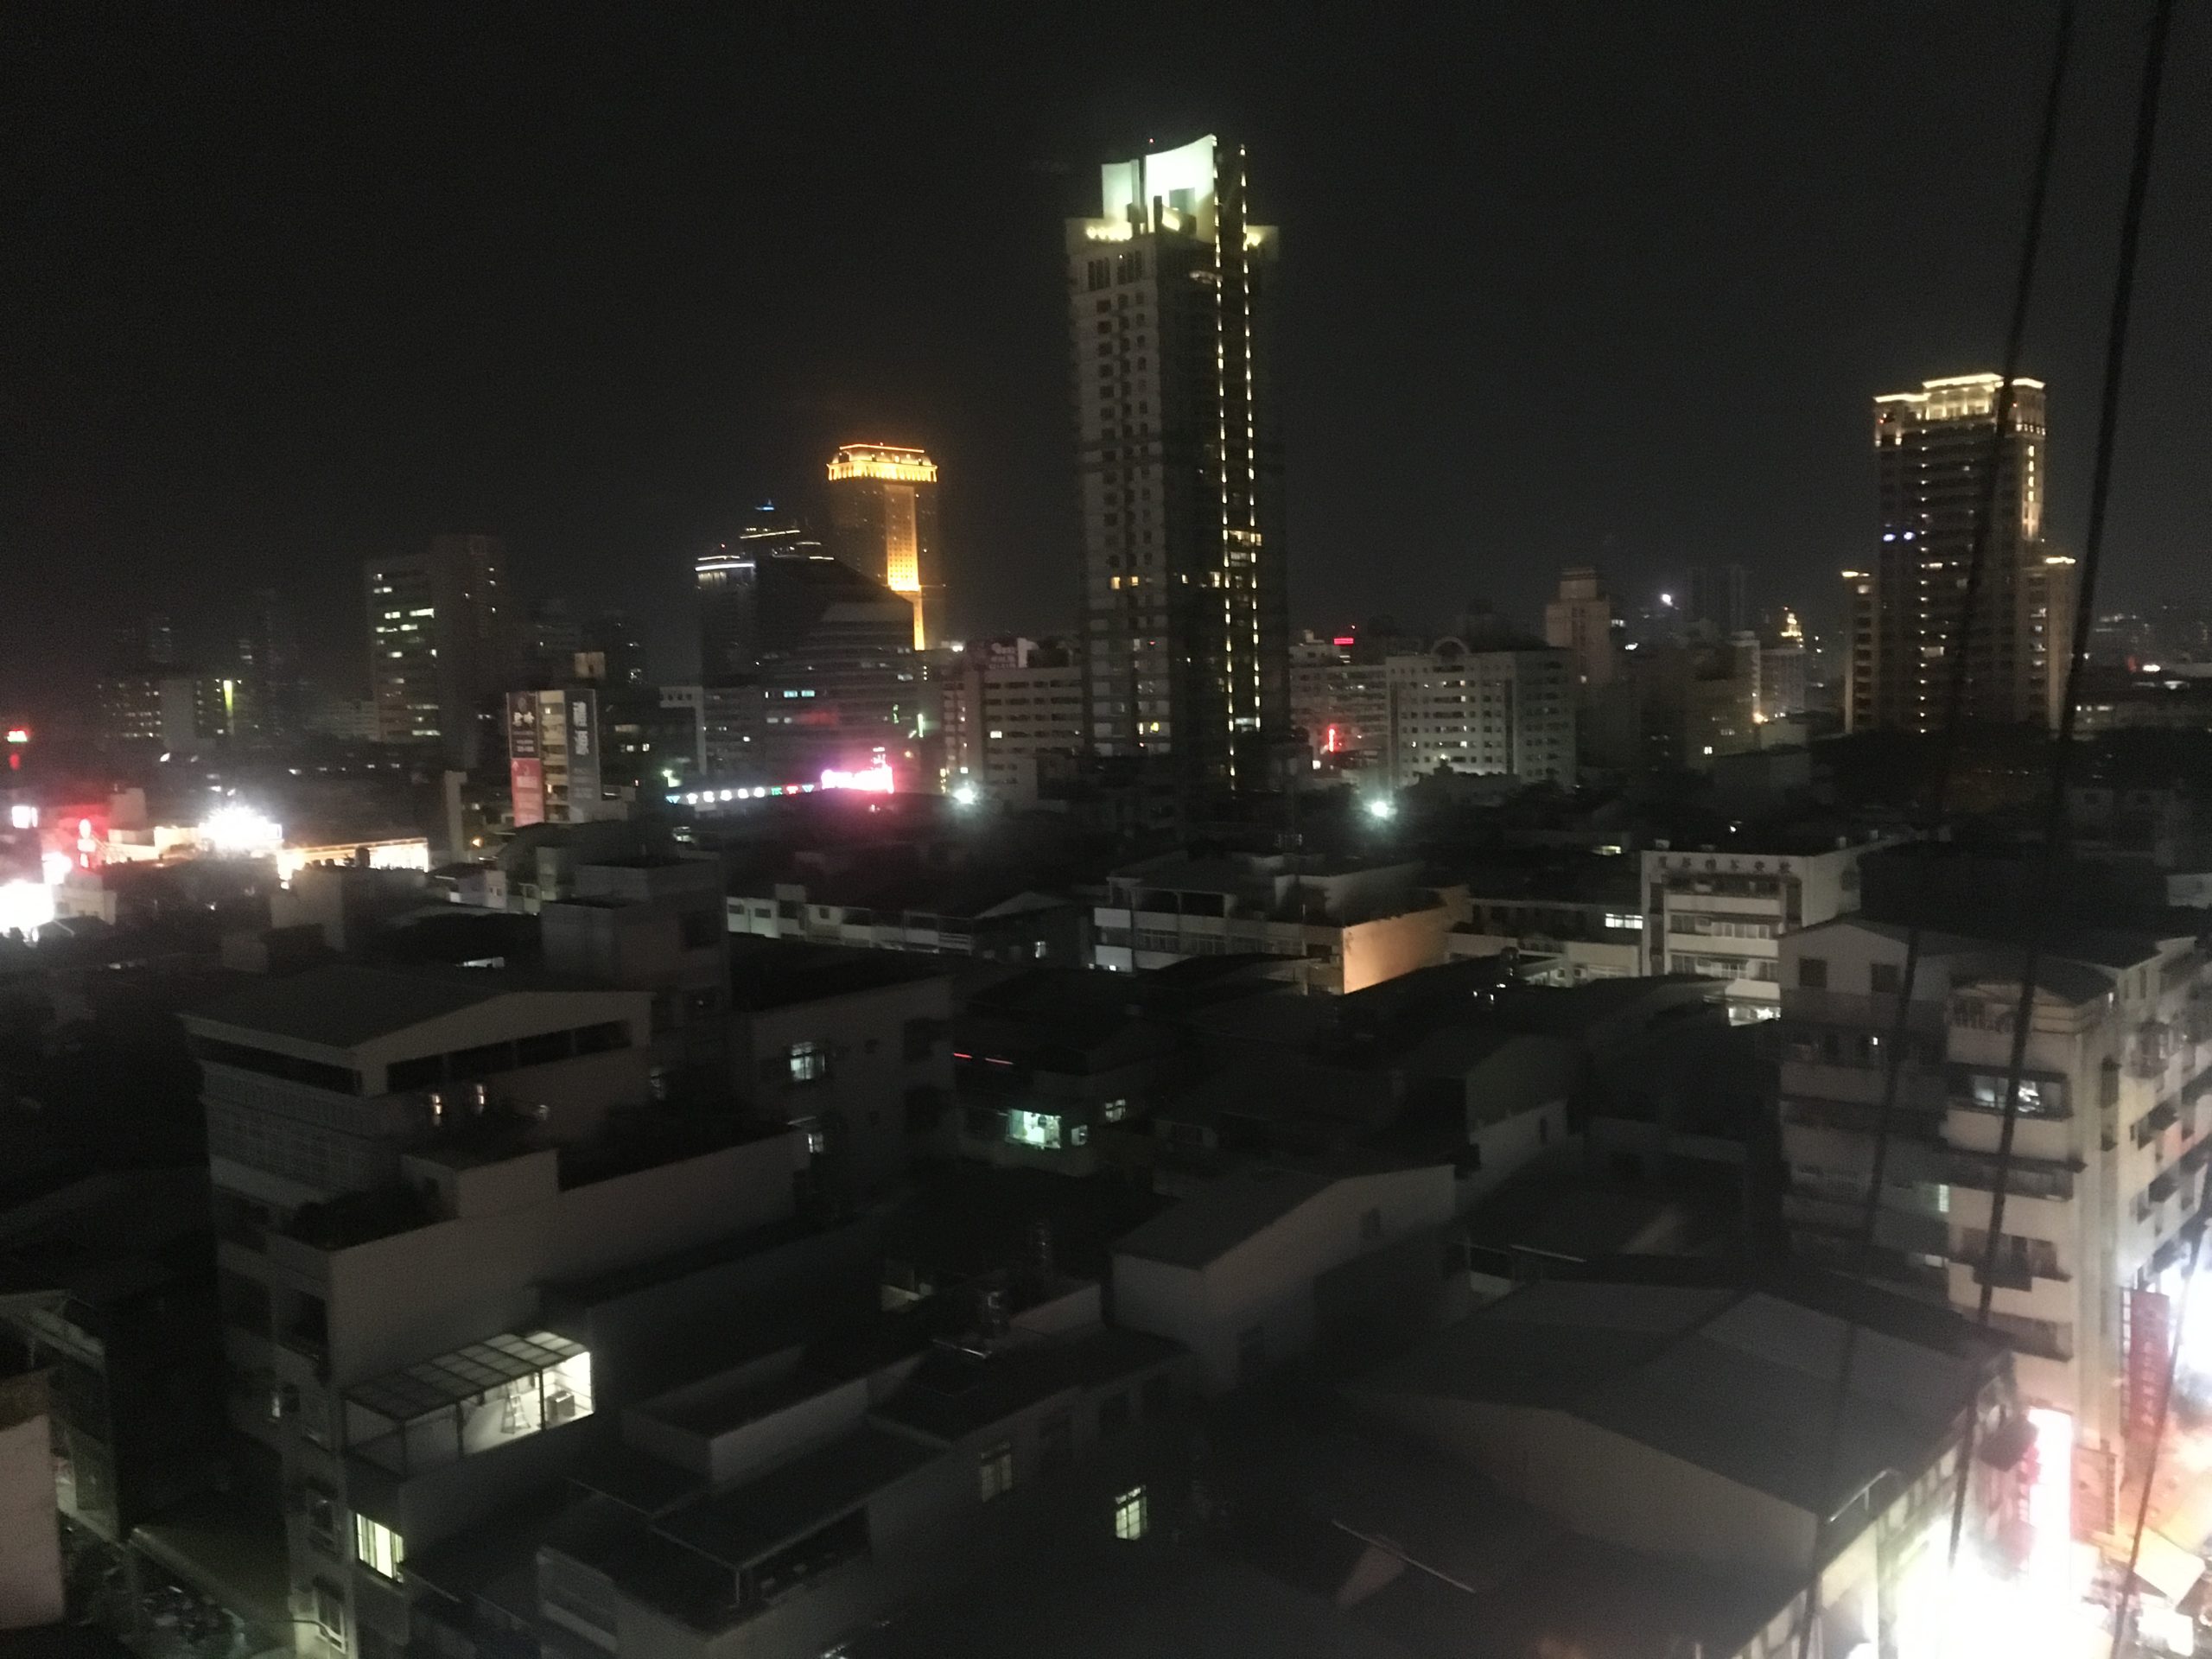 Night inner city Kaohsiung from balcony of R8Hotel